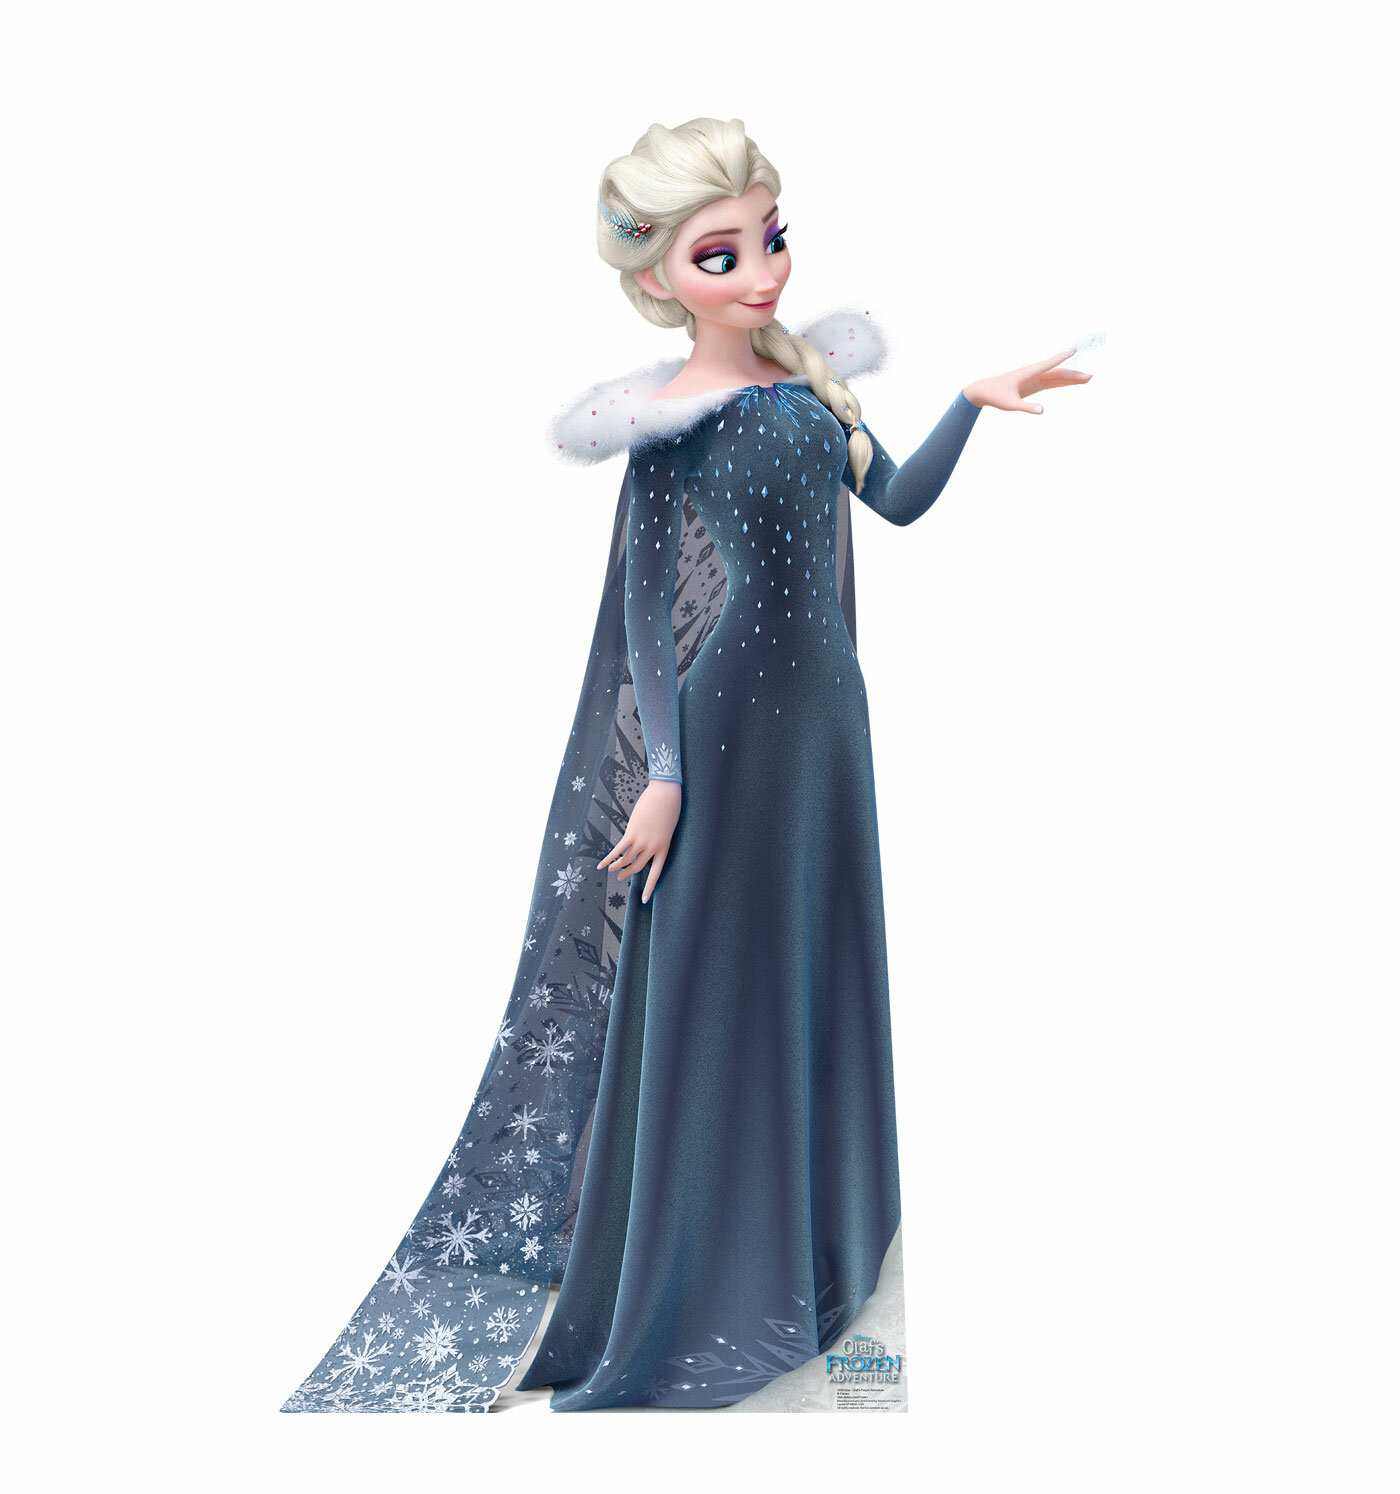 ELSA FROM DISNEY FROZEN FEVER CARDBOARD CUTOUT/STAND UP GREAT FOR FROZEN FANS 